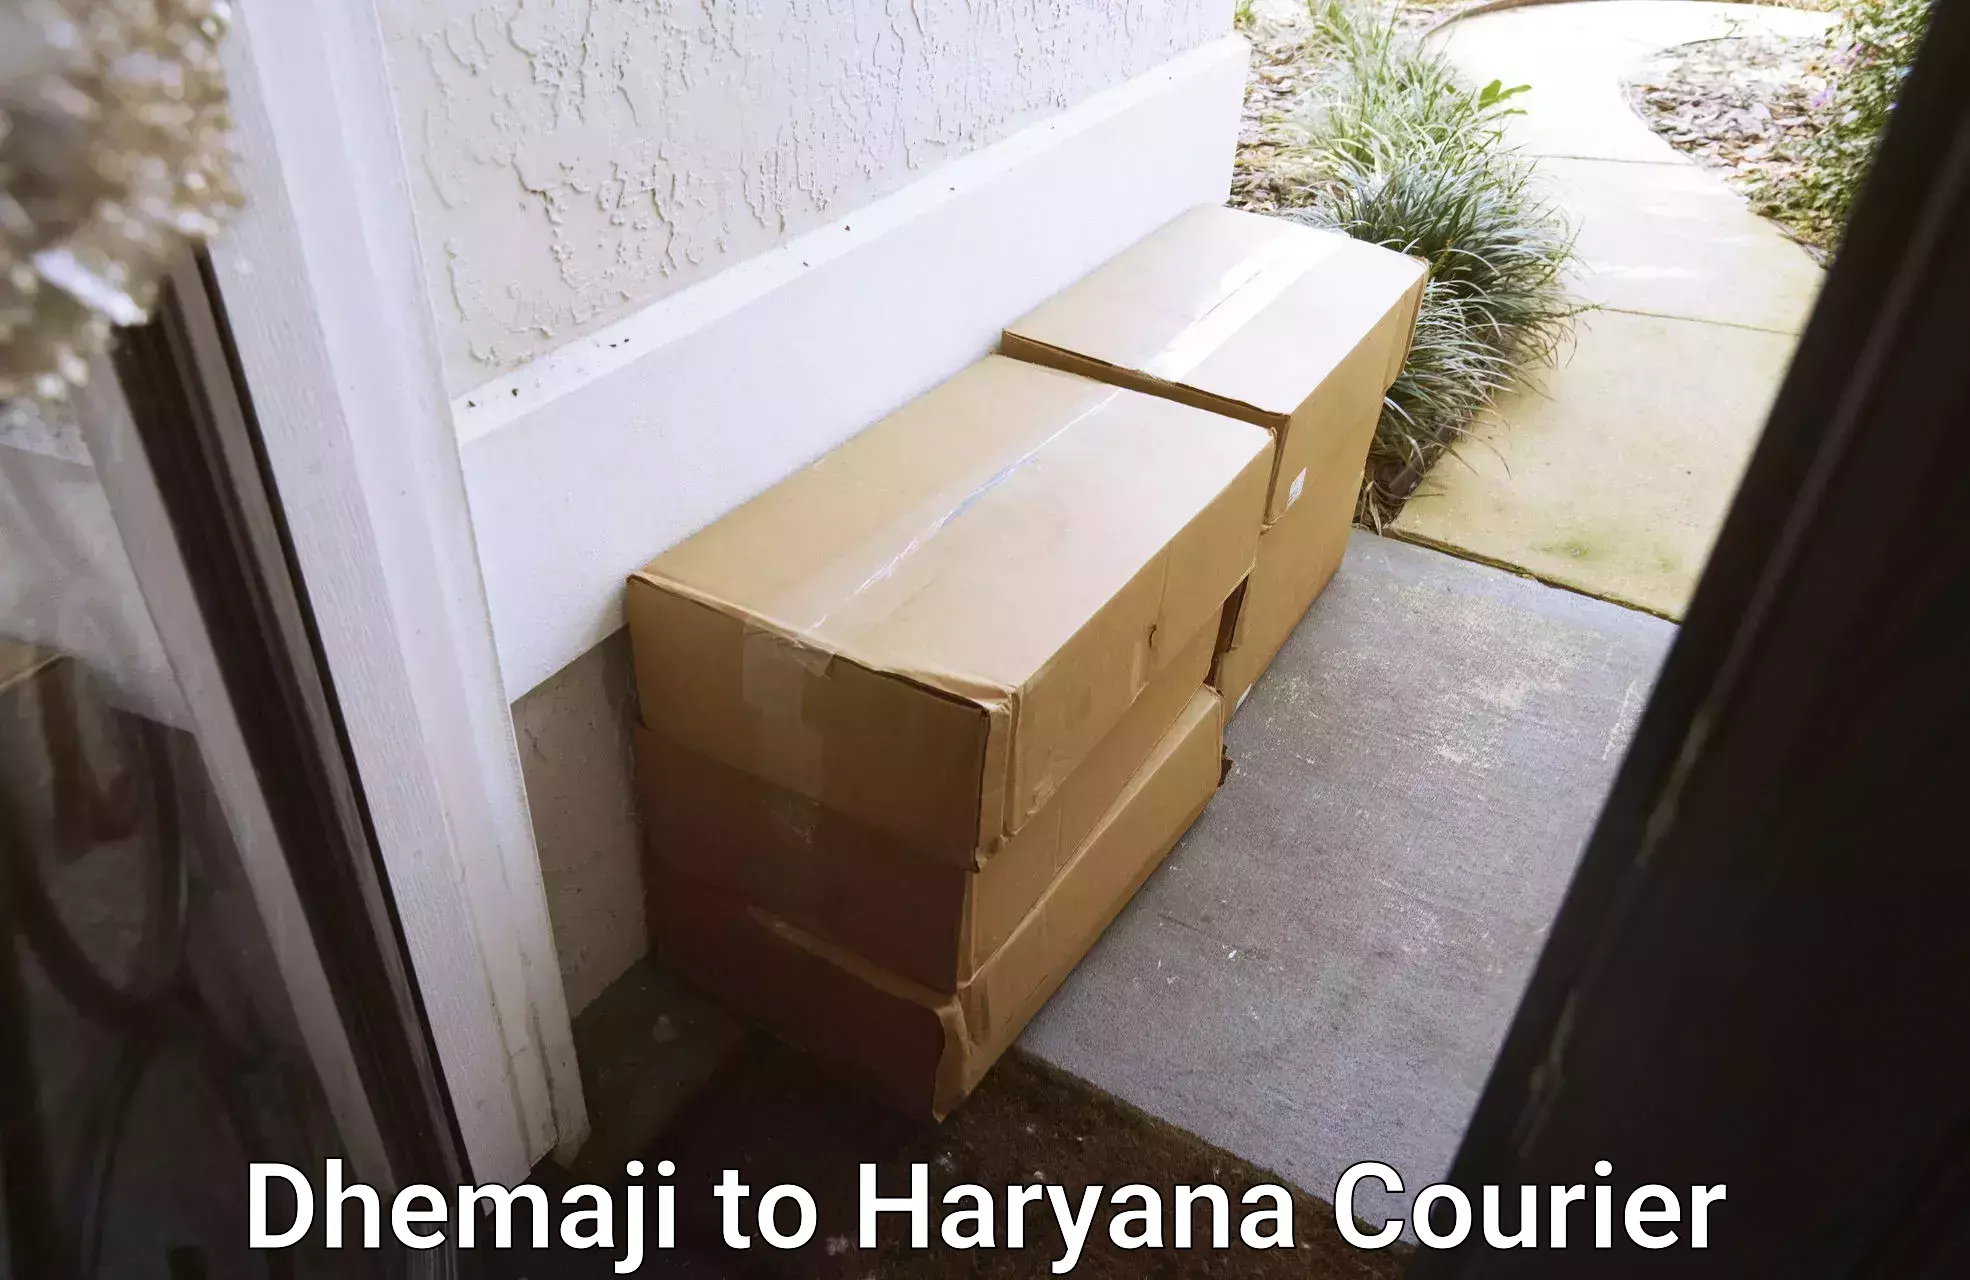 Courier service innovation Dhemaji to Haryana